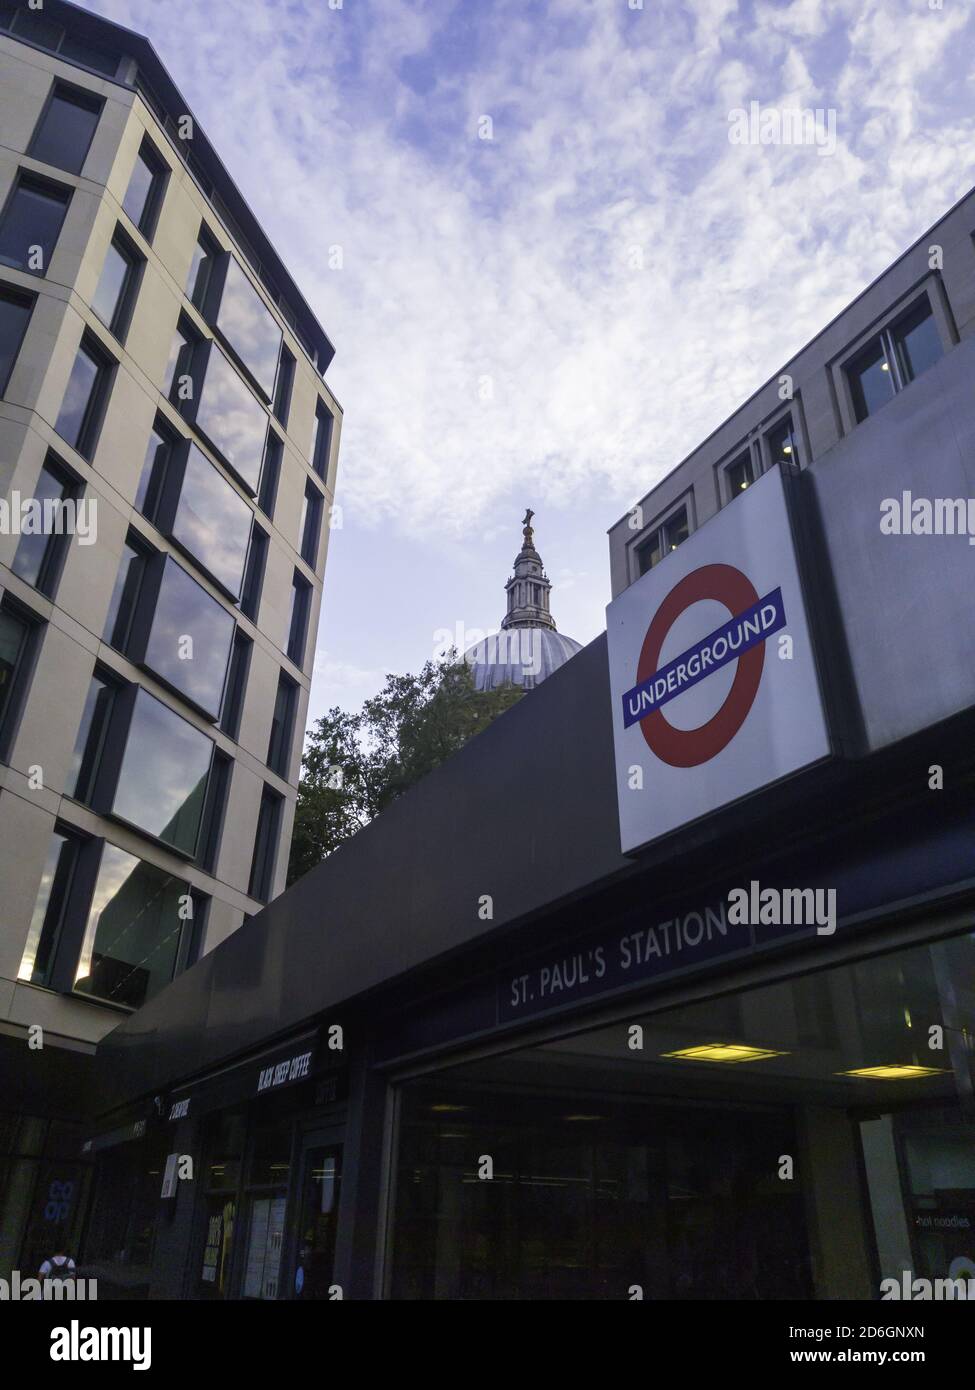 LOND, UNITED KINGDOM - Sep 19, 2020: view of tube in st cathedral station Stock Photo